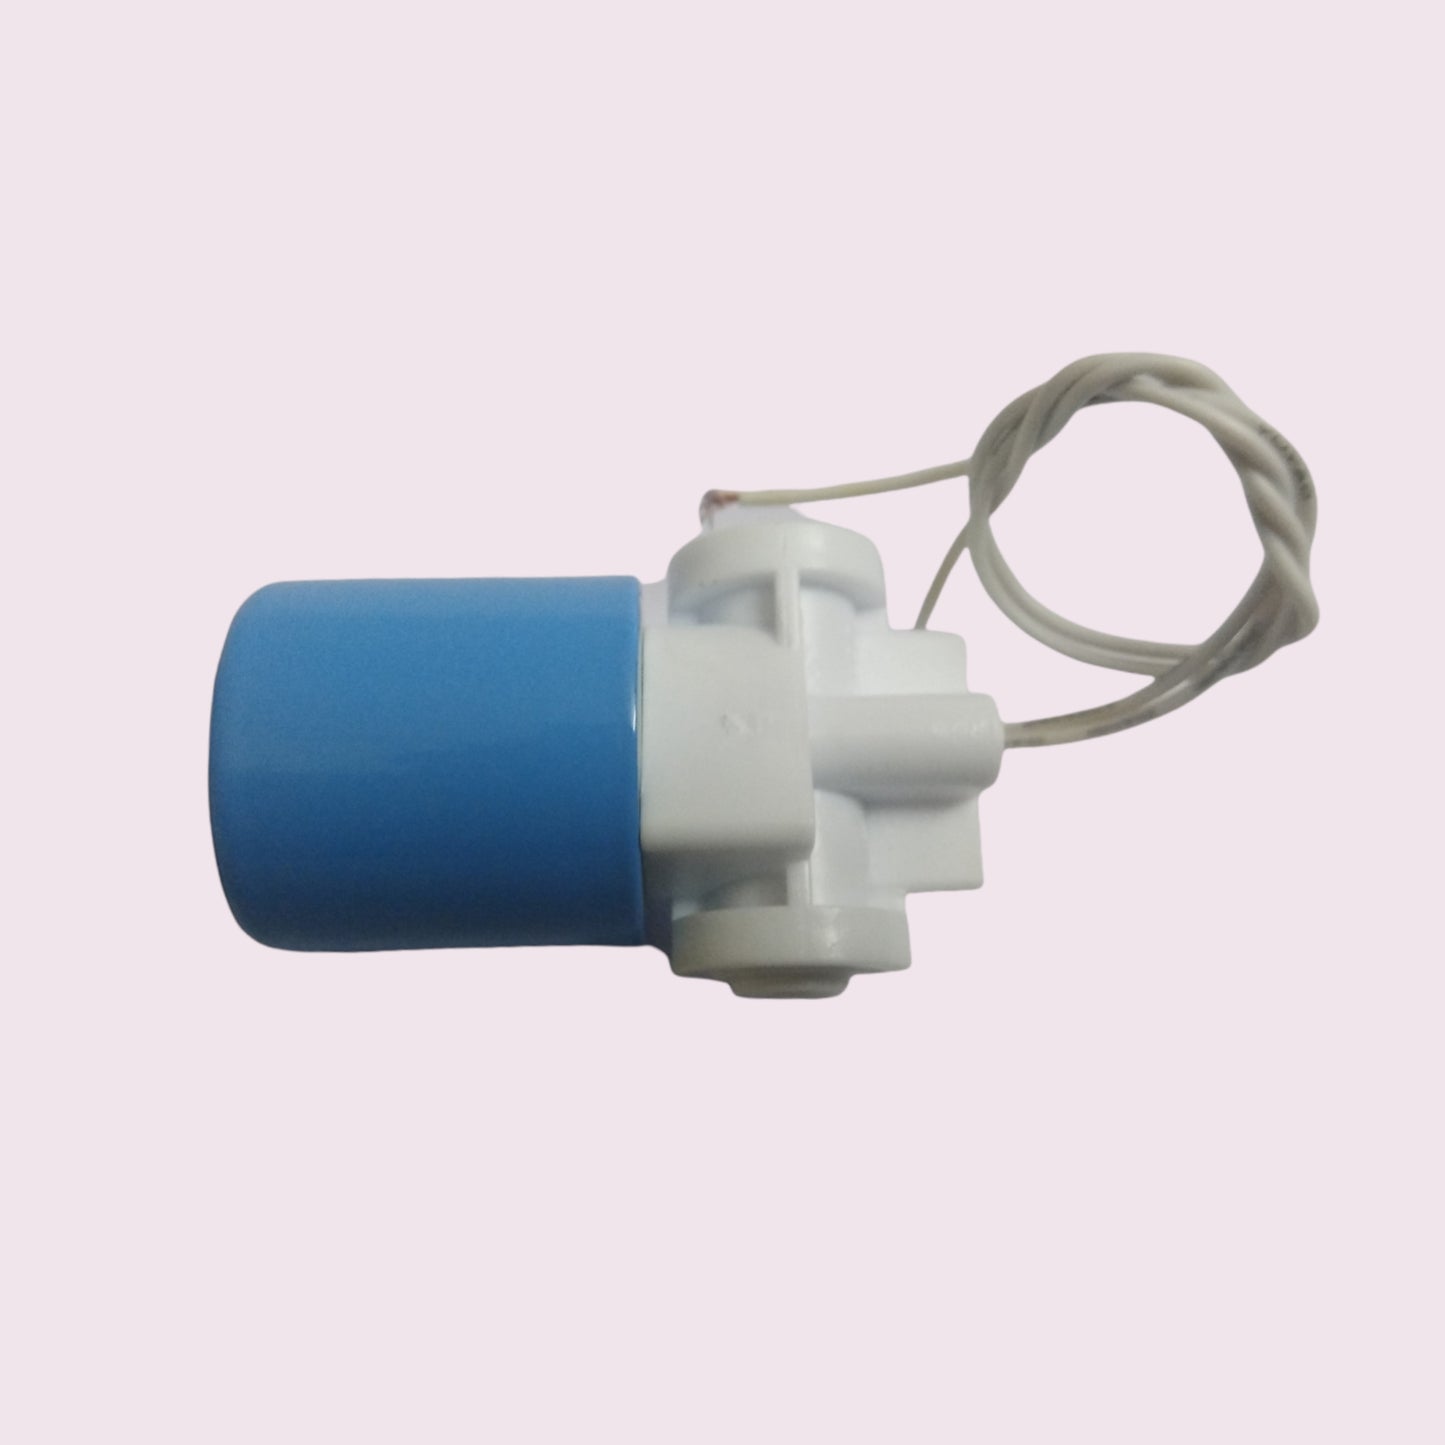 24 Volt DC Solenoid Valve suitable for Domestic RO System.